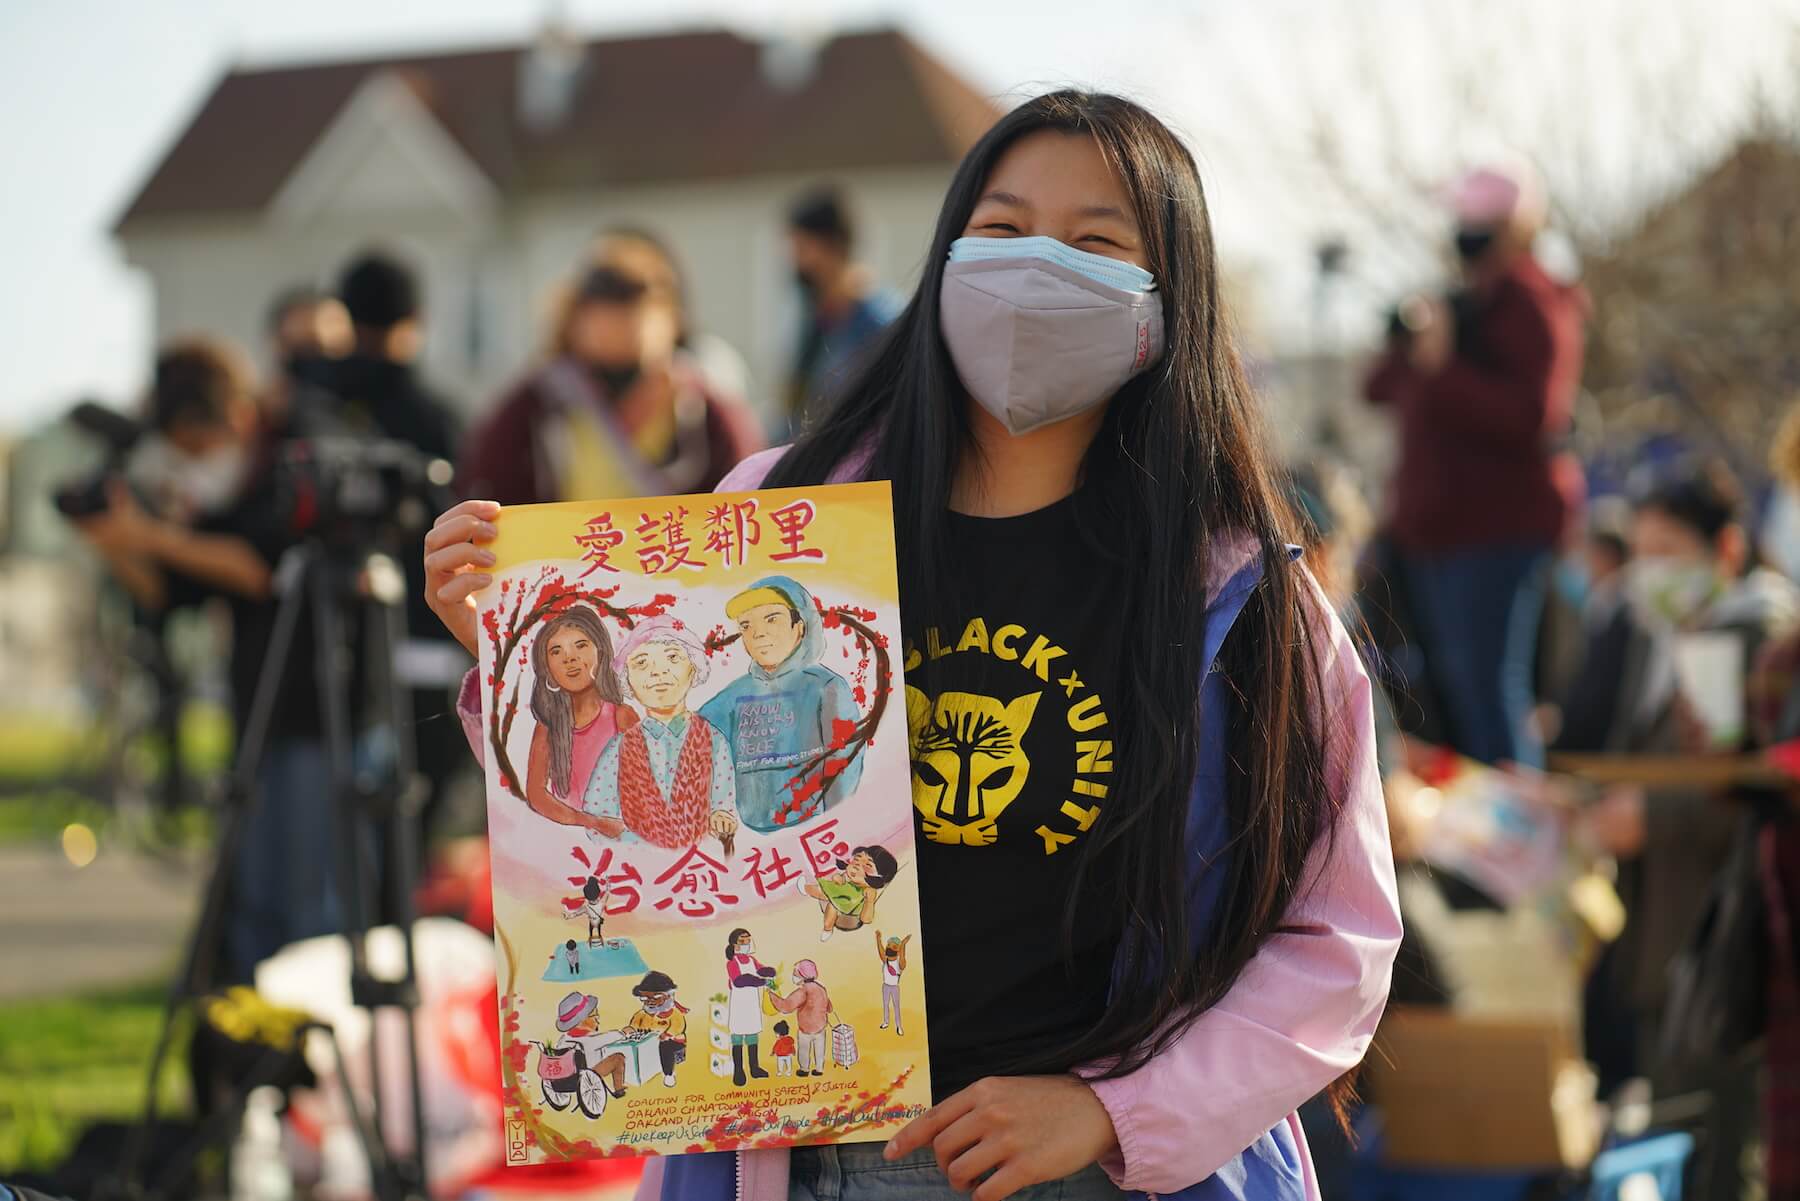 A young Asian woman with long hair holds up a poster depicting three people and a heart around them. She is wearing an Asian-Black Unity T-shirt.